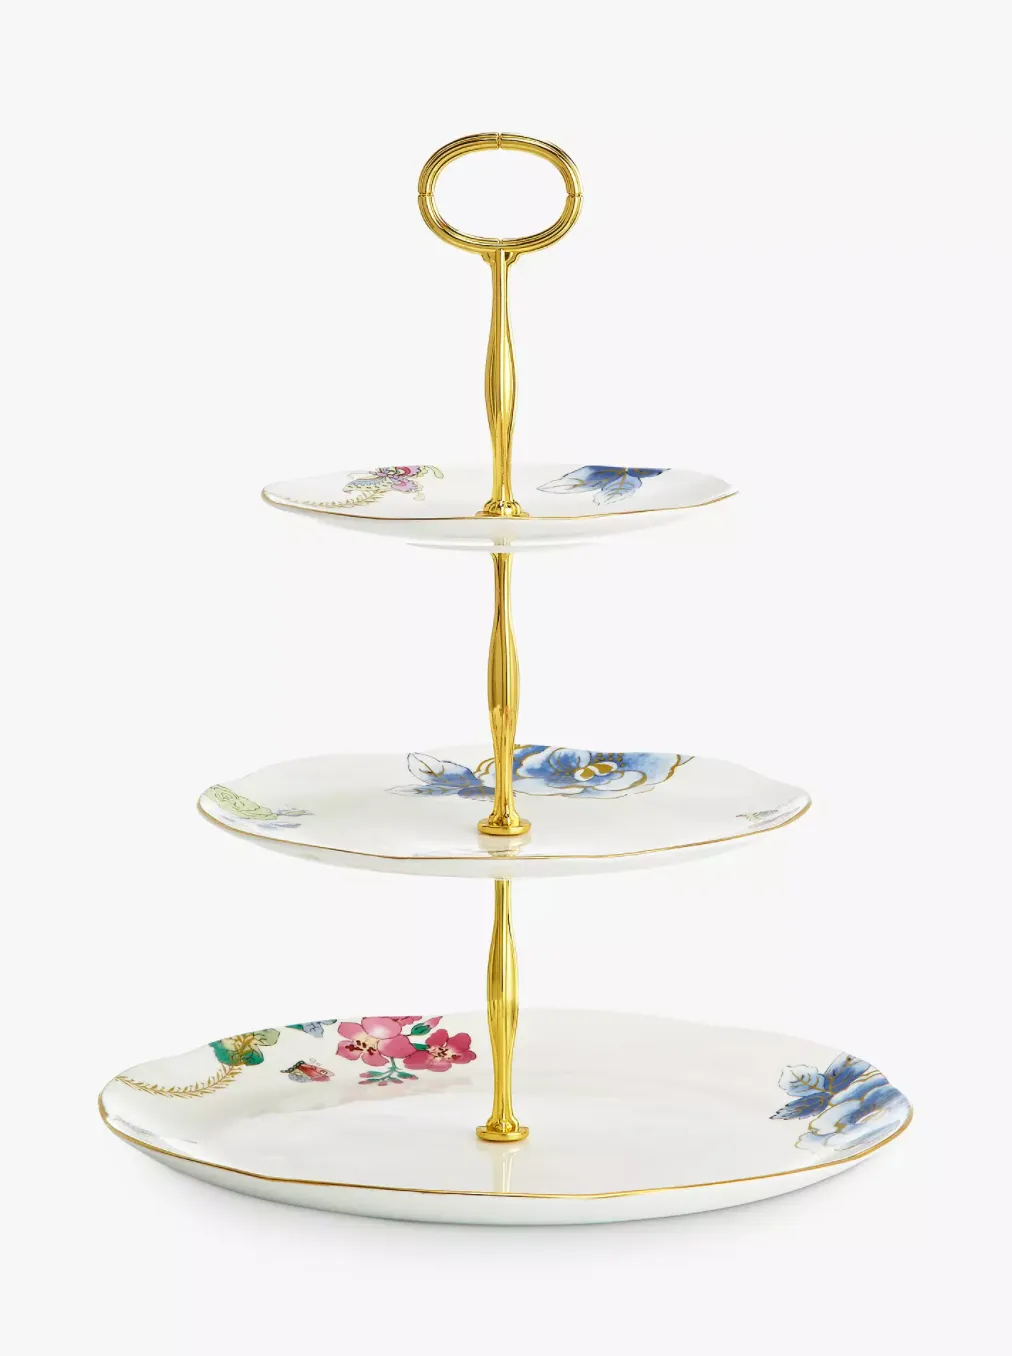 Wedgwood Butterfly Bloom 3 tier cake stand, £135, John Lewis & Partners